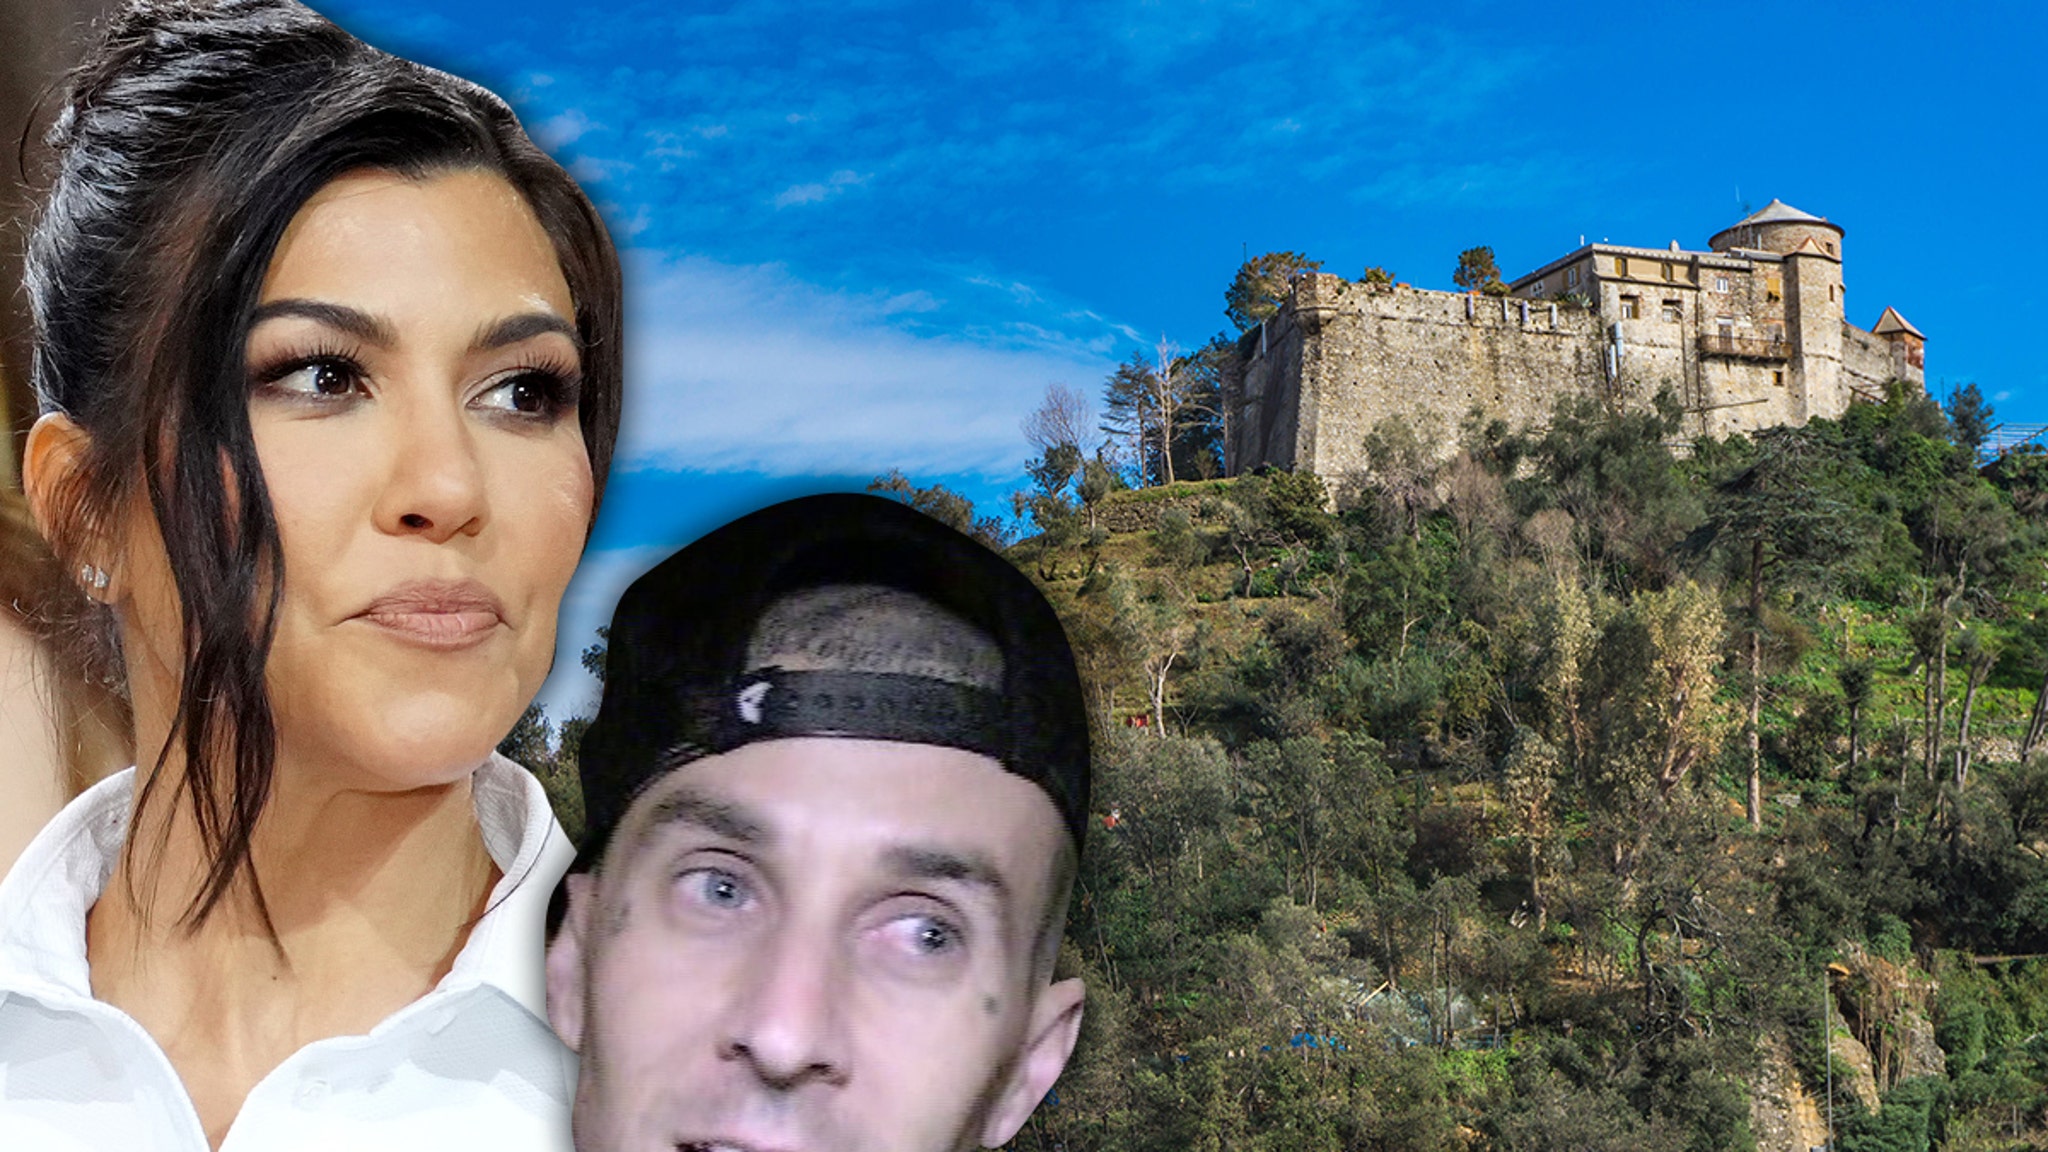 Kourtney Kardashian and Travis Barker Renting Italian Castle for Wedding - TMZ : Kourtney Kardashian and Travis Barker are doing it big, as expected, when they say their "I Do's" ... renting out an Italian castle for the super intimate ceremony.  | Tranquility 國際社群